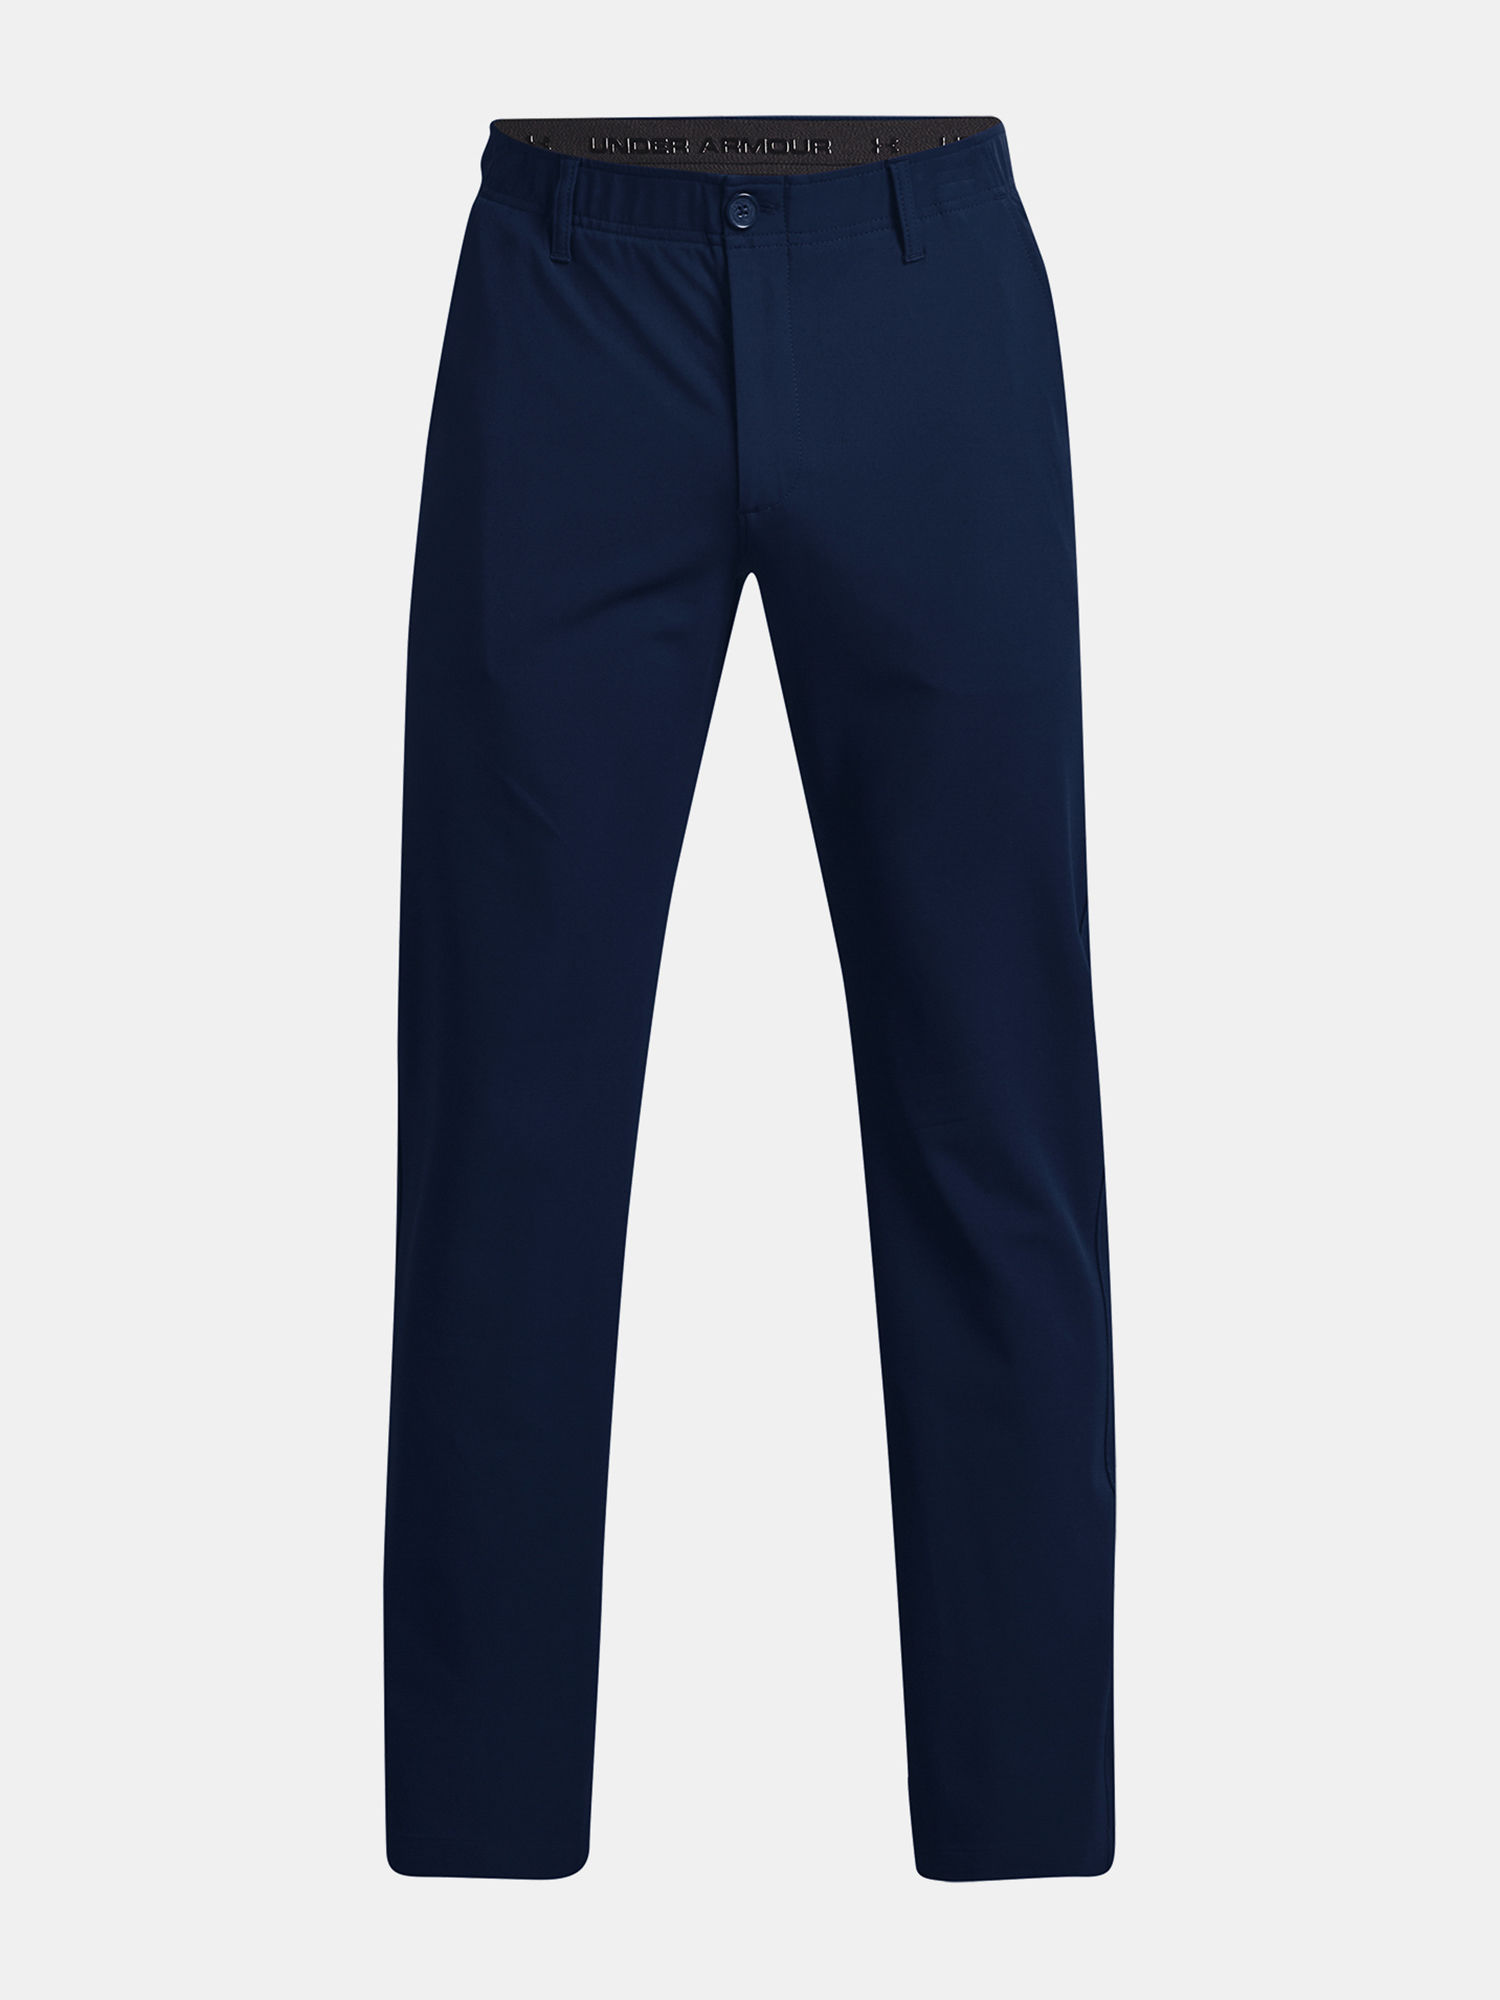 Nohavice Under Armour UA Drive Pant-NVY (3)